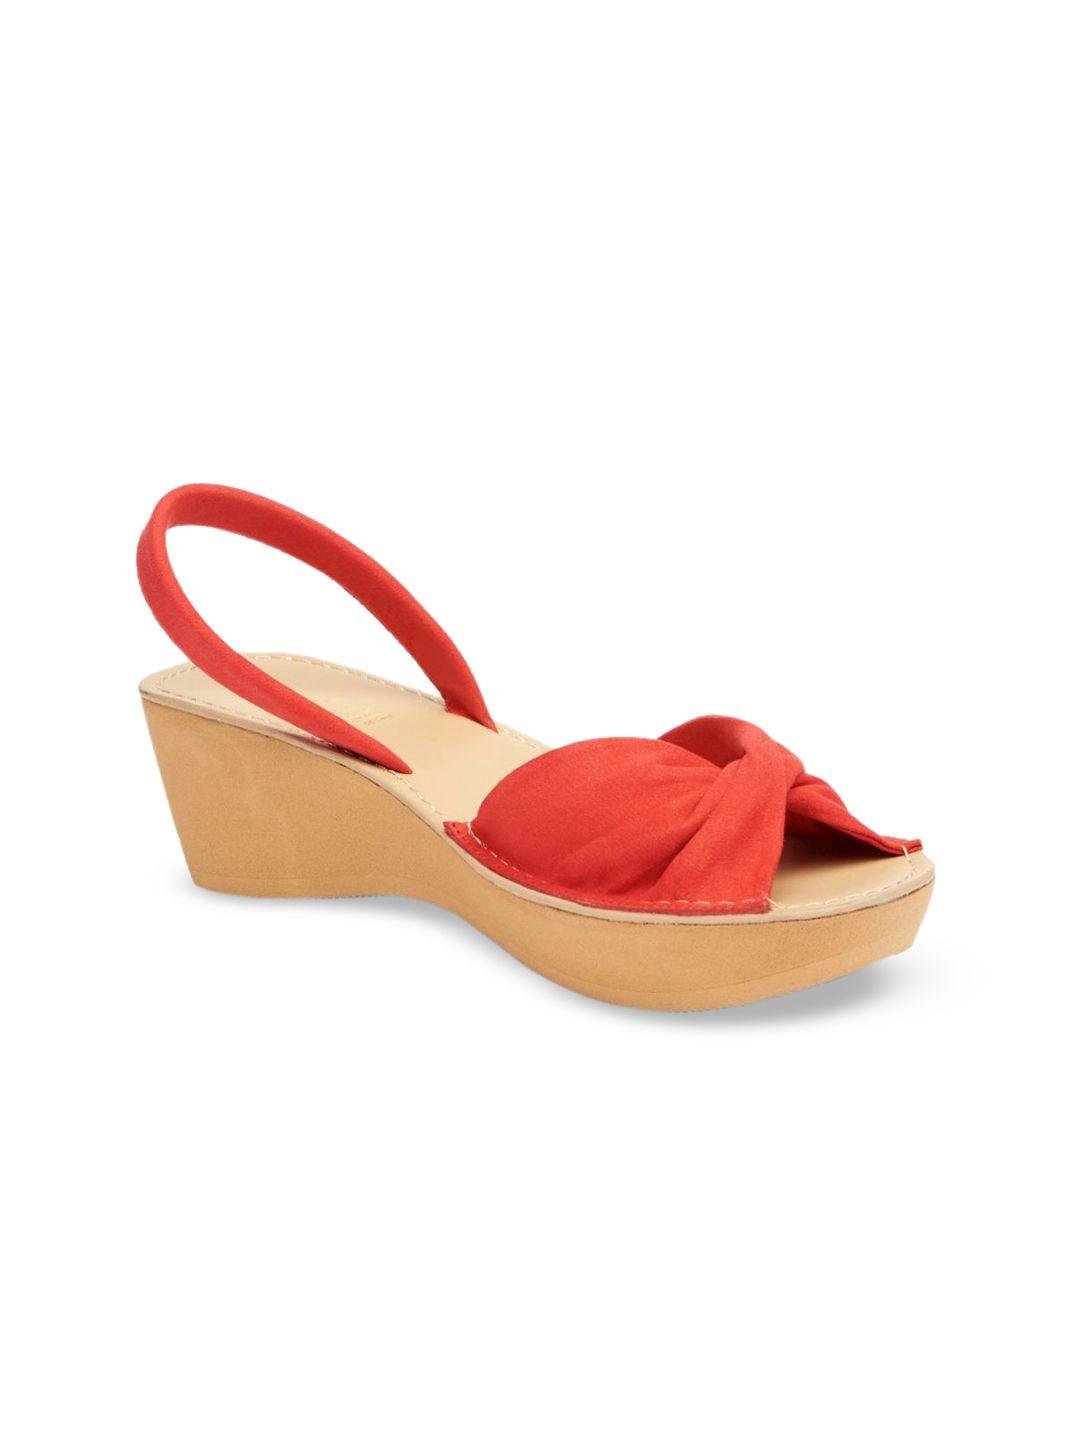 kenneth-cole-women-red-solid-heels